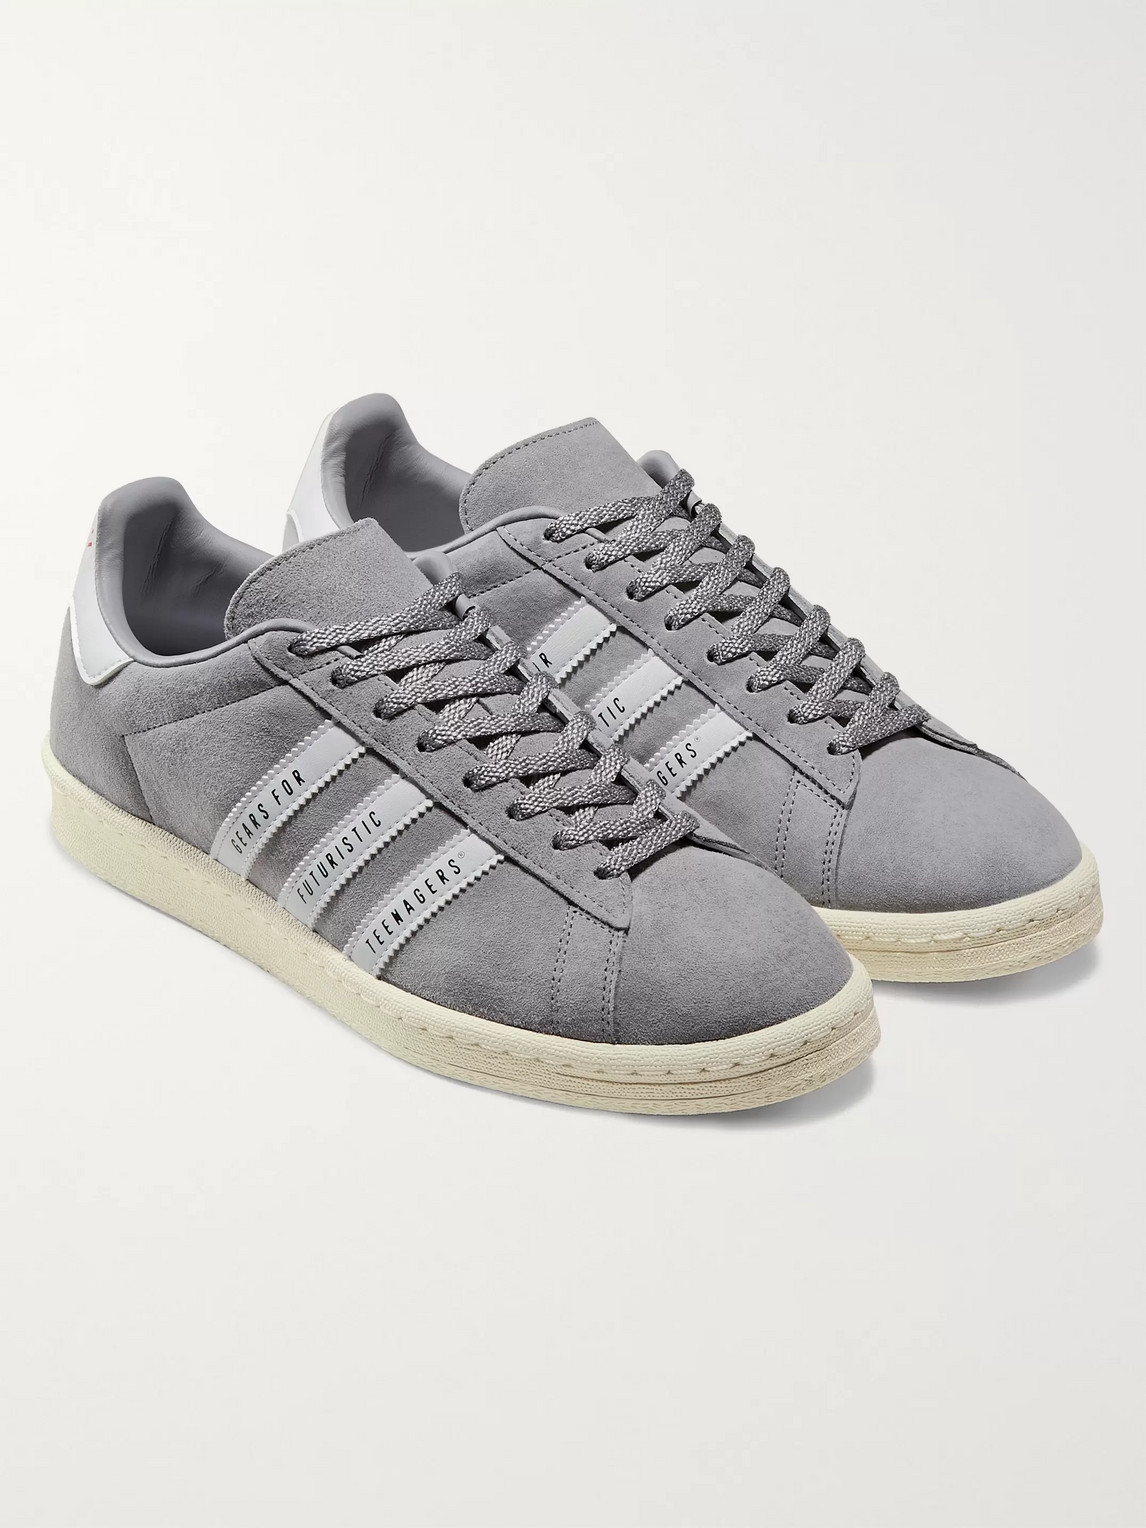 Adidas Consortium Human Made Campus Leather-trimmed Suede Sneakers In Gray